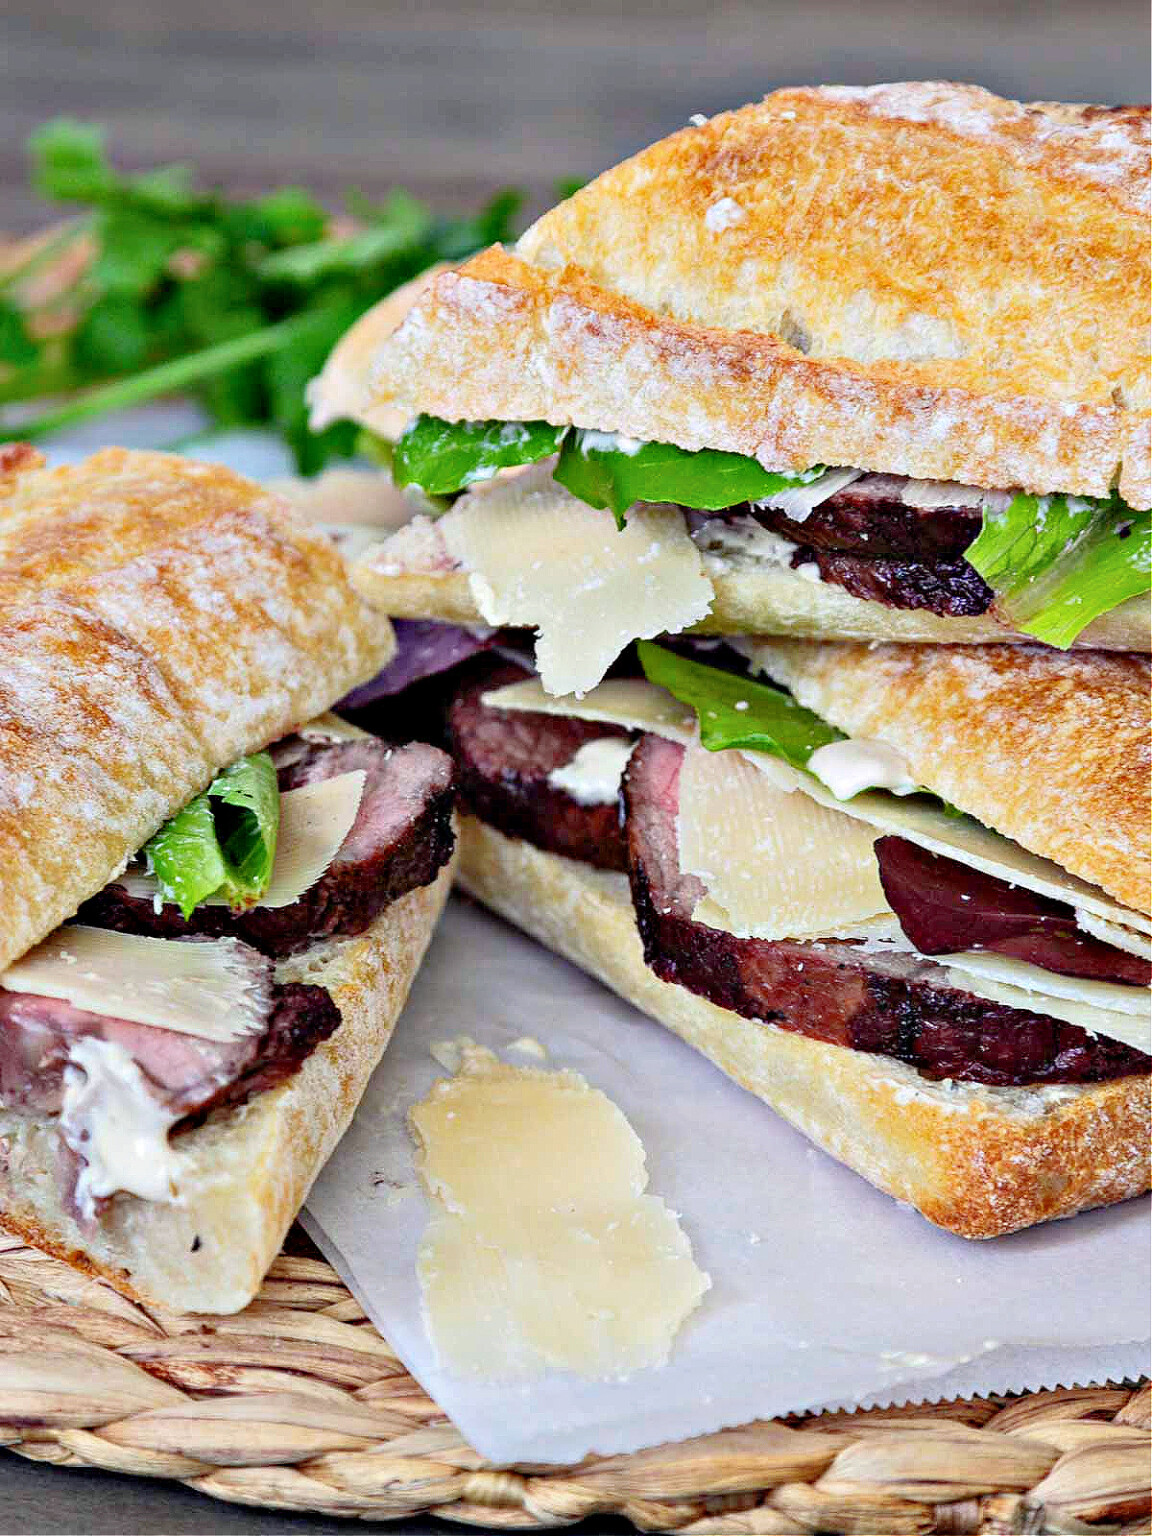 Roast Beef Sandwiches | Delicious Table